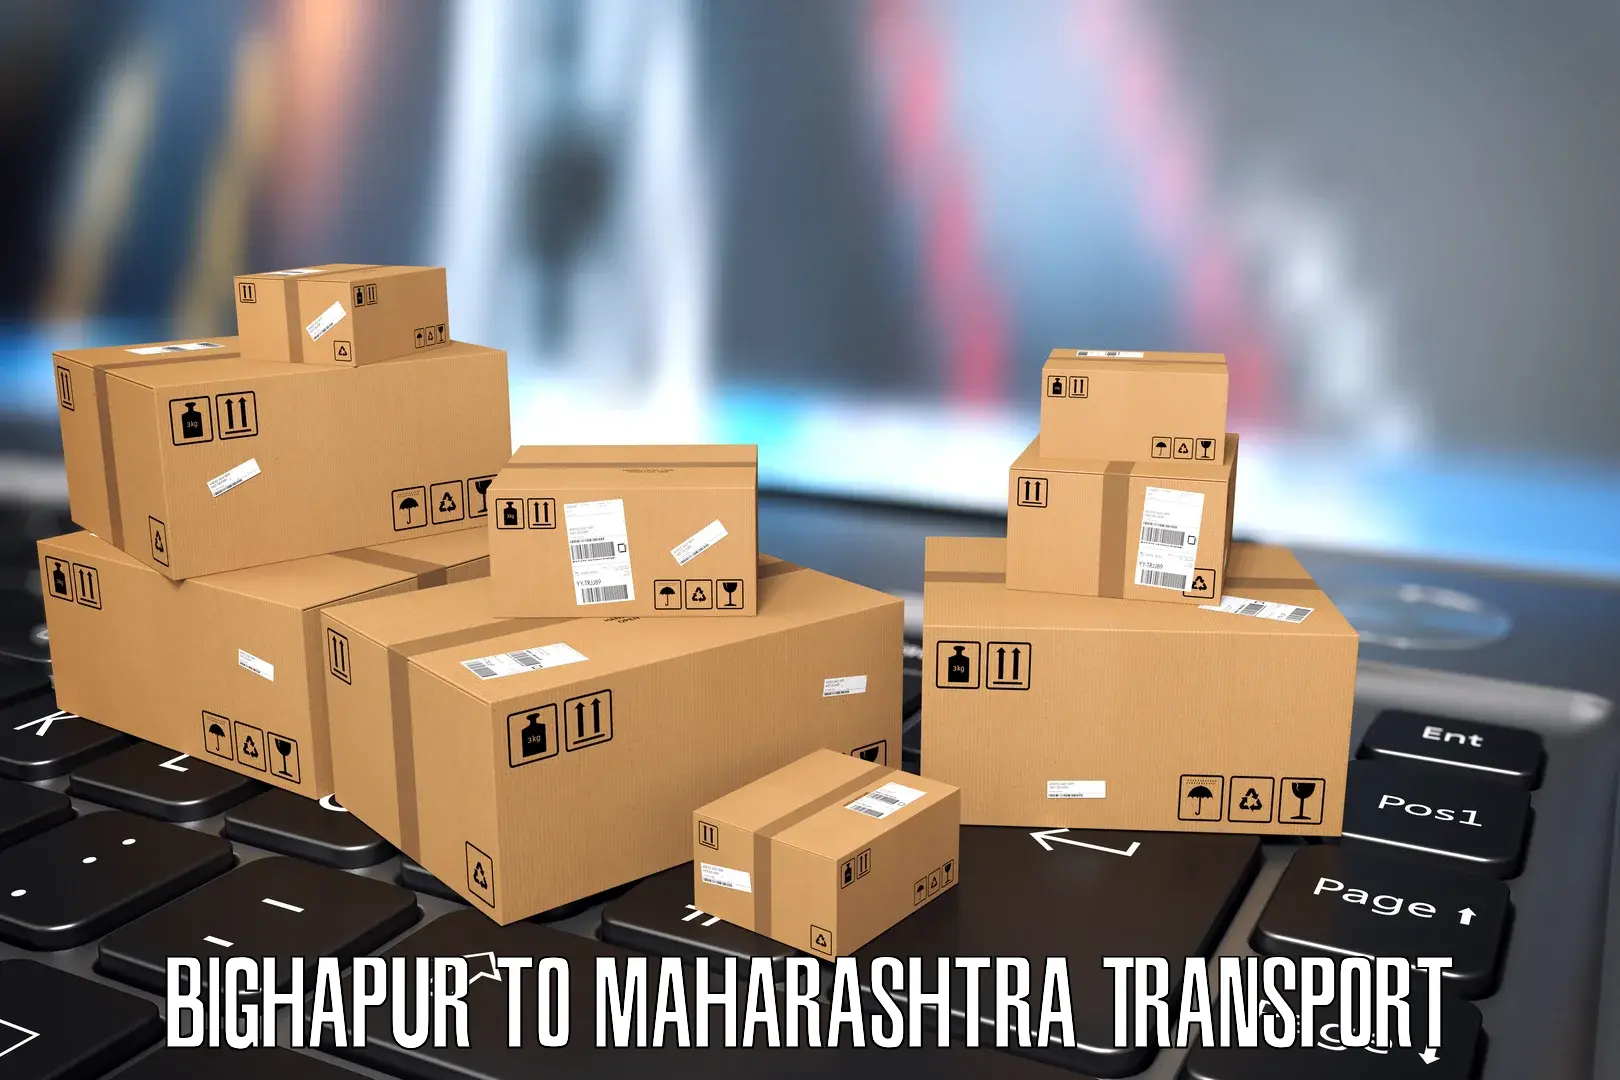 Air cargo transport services Bighapur to Bhusawal